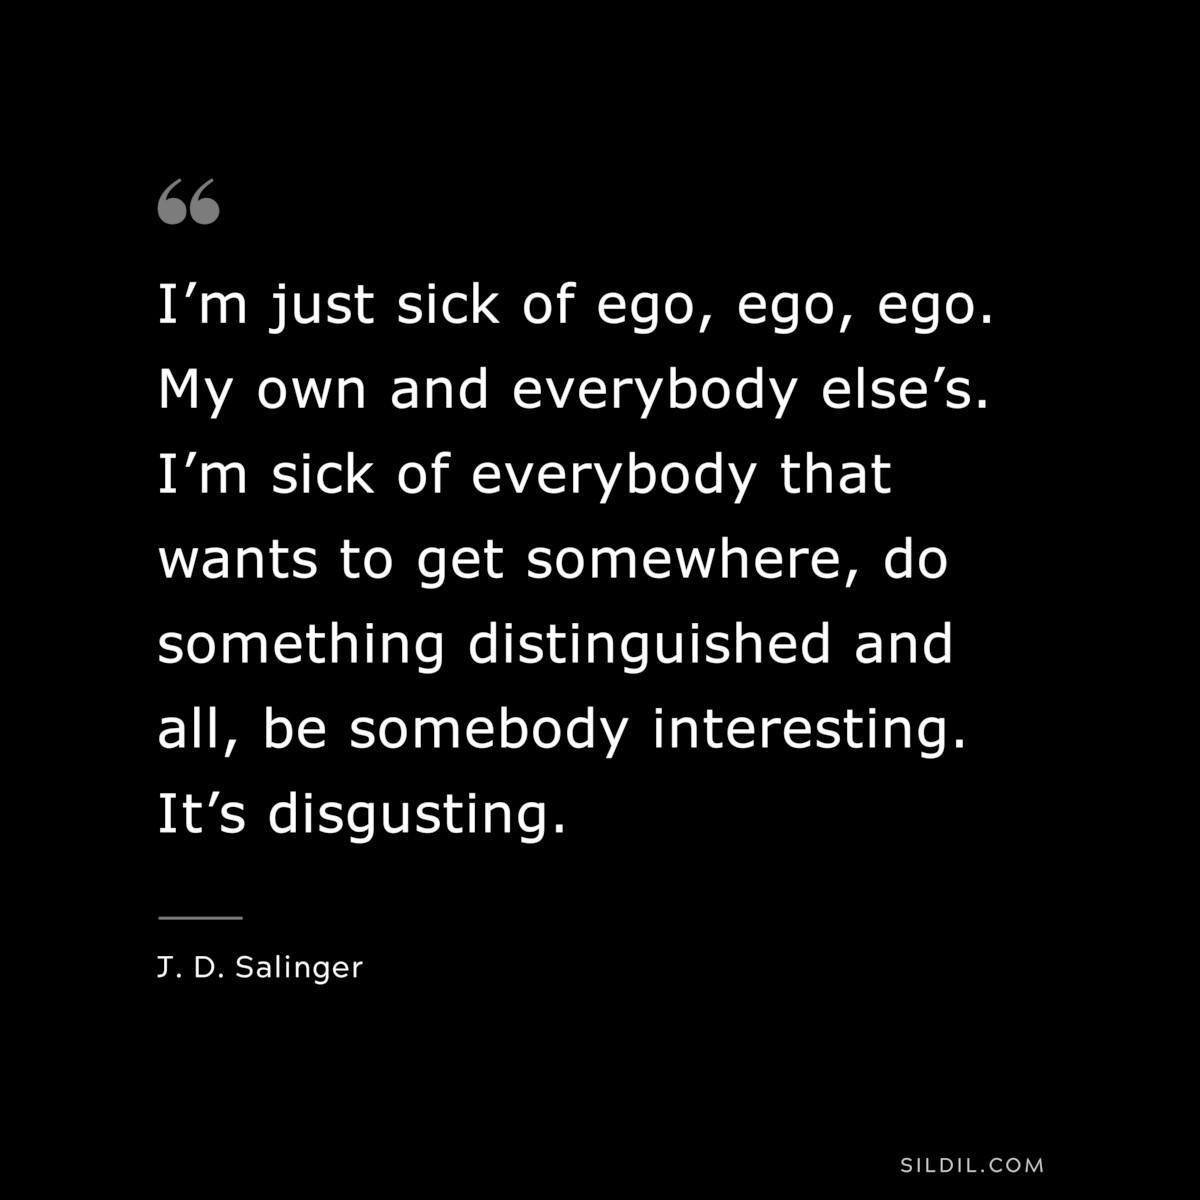 I’m just sick of ego, ego, ego. My own and everybody else’s. I’m sick of everybody that wants to get somewhere, do something distinguished and all, be somebody interesting. It’s disgusting. — J. D. Salinger